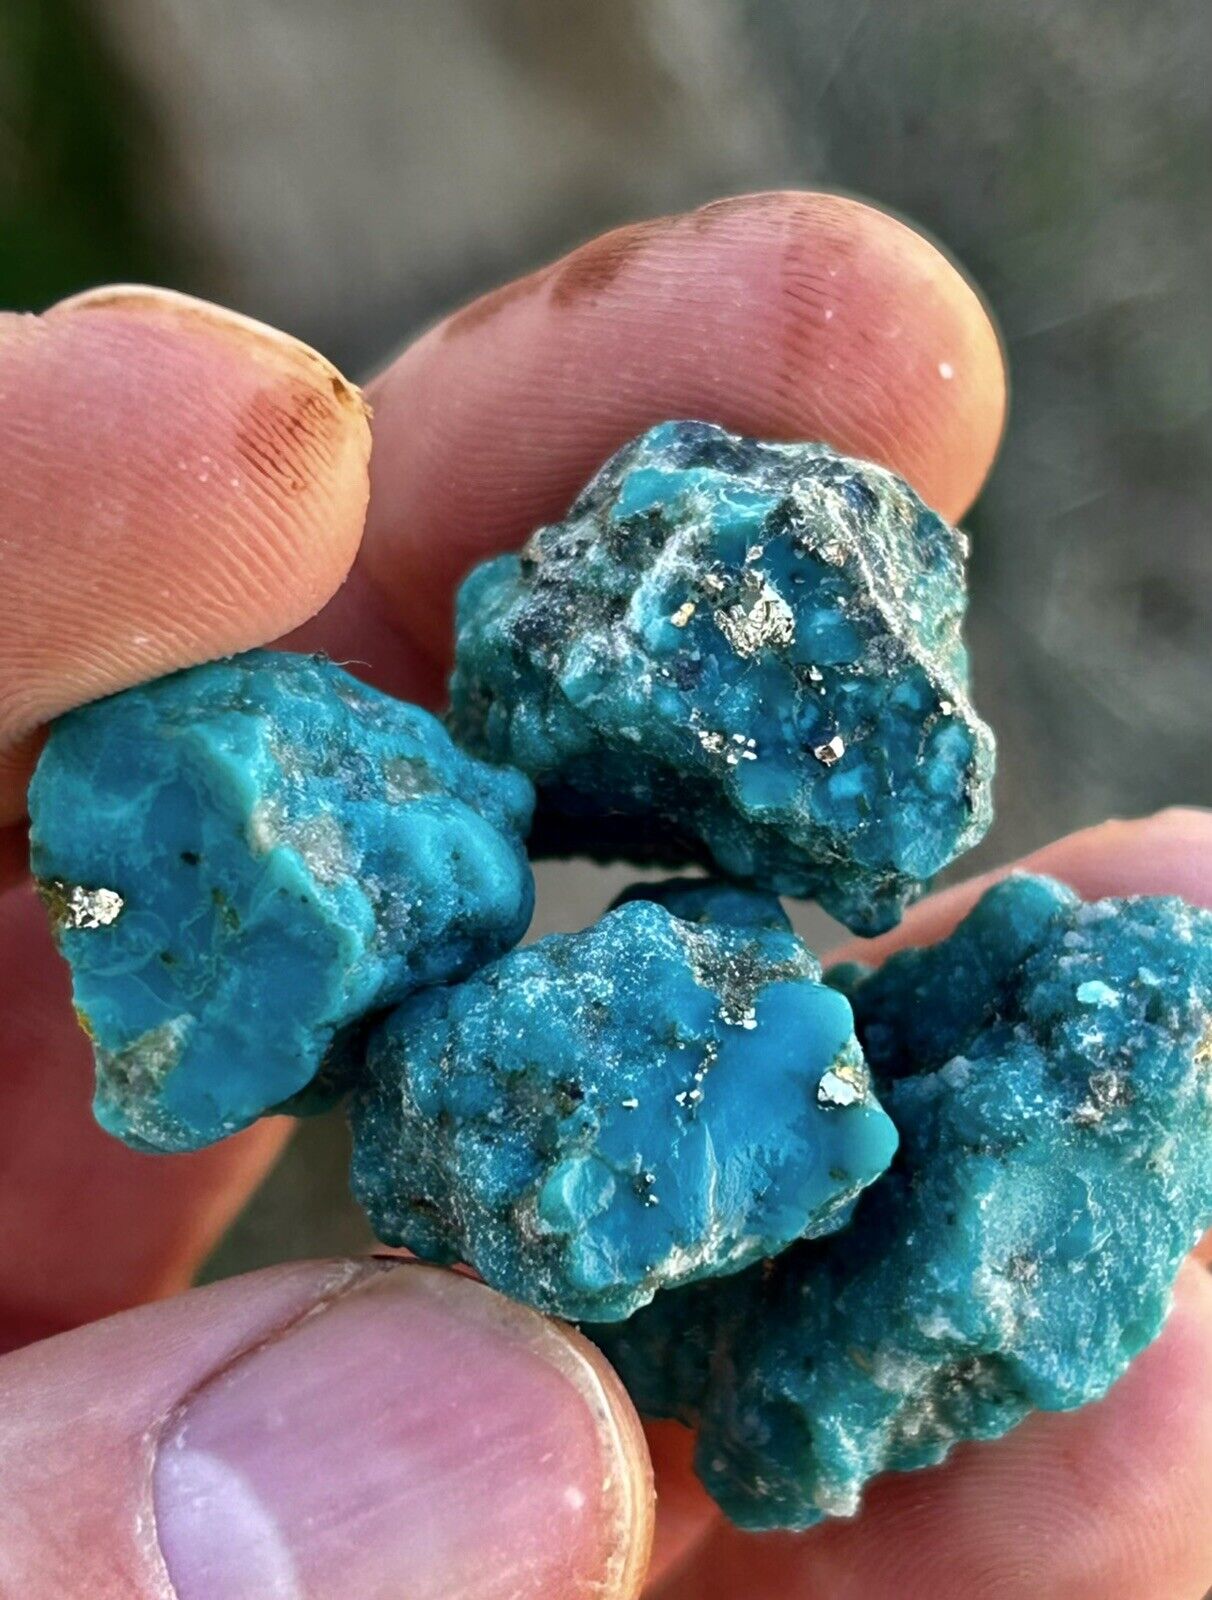 SPECIAL OFFER: 1 LB Blue Basin Graded Turquoise, Arizona-mined. Electric Blues